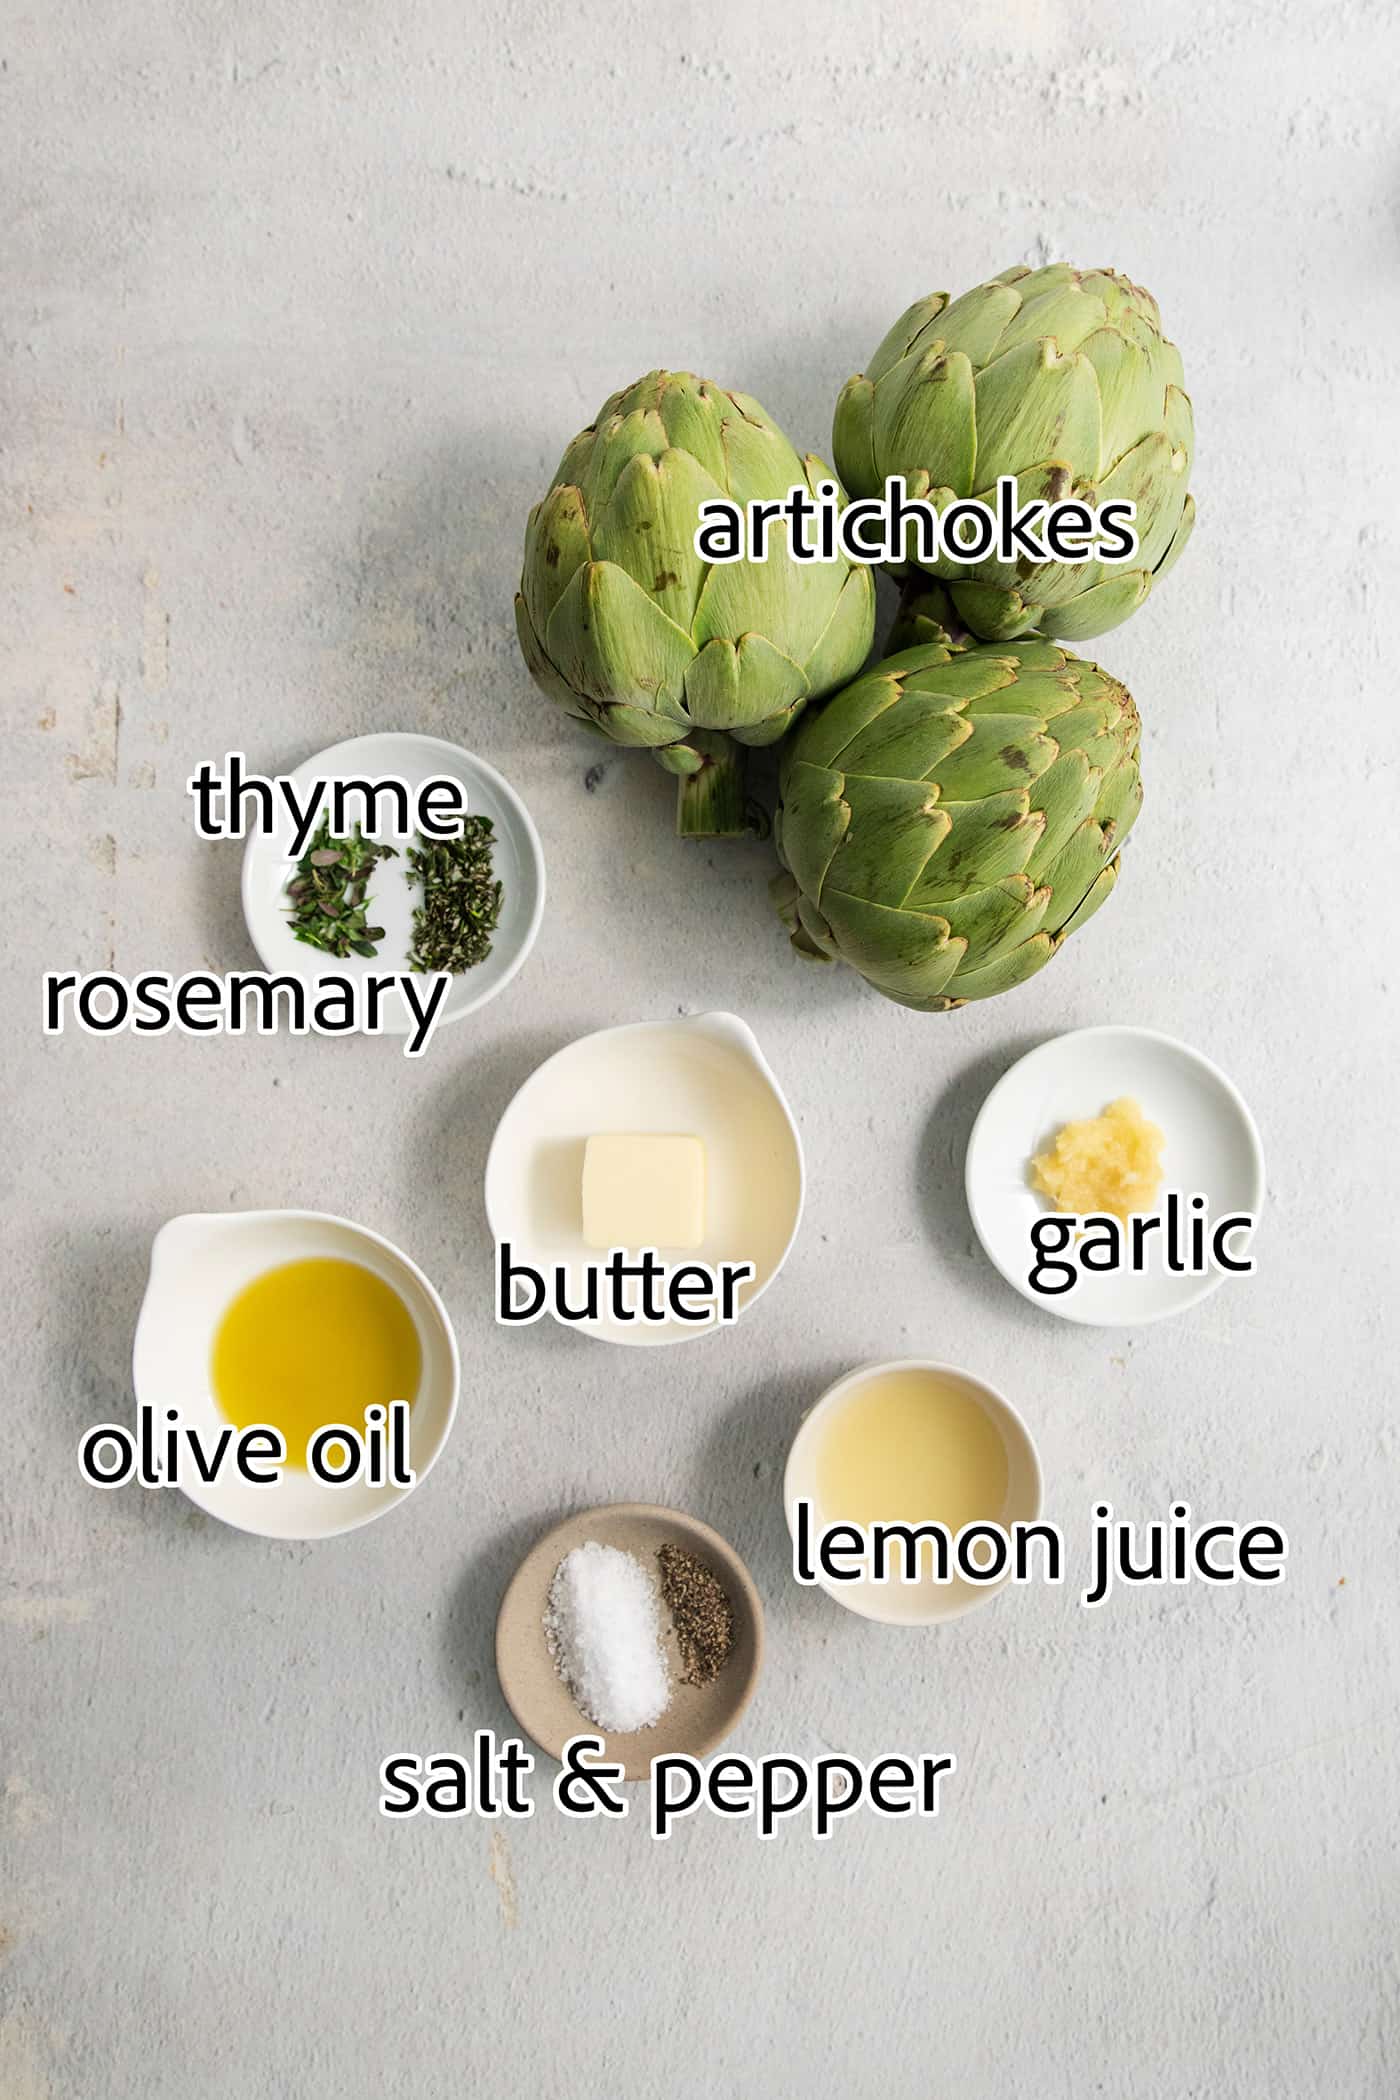 The ingredients needed for roasted artichoke are shown: three raw artichokes, olive oil, salt, butter, rosemary, thyme, lemon juice, and garlic.